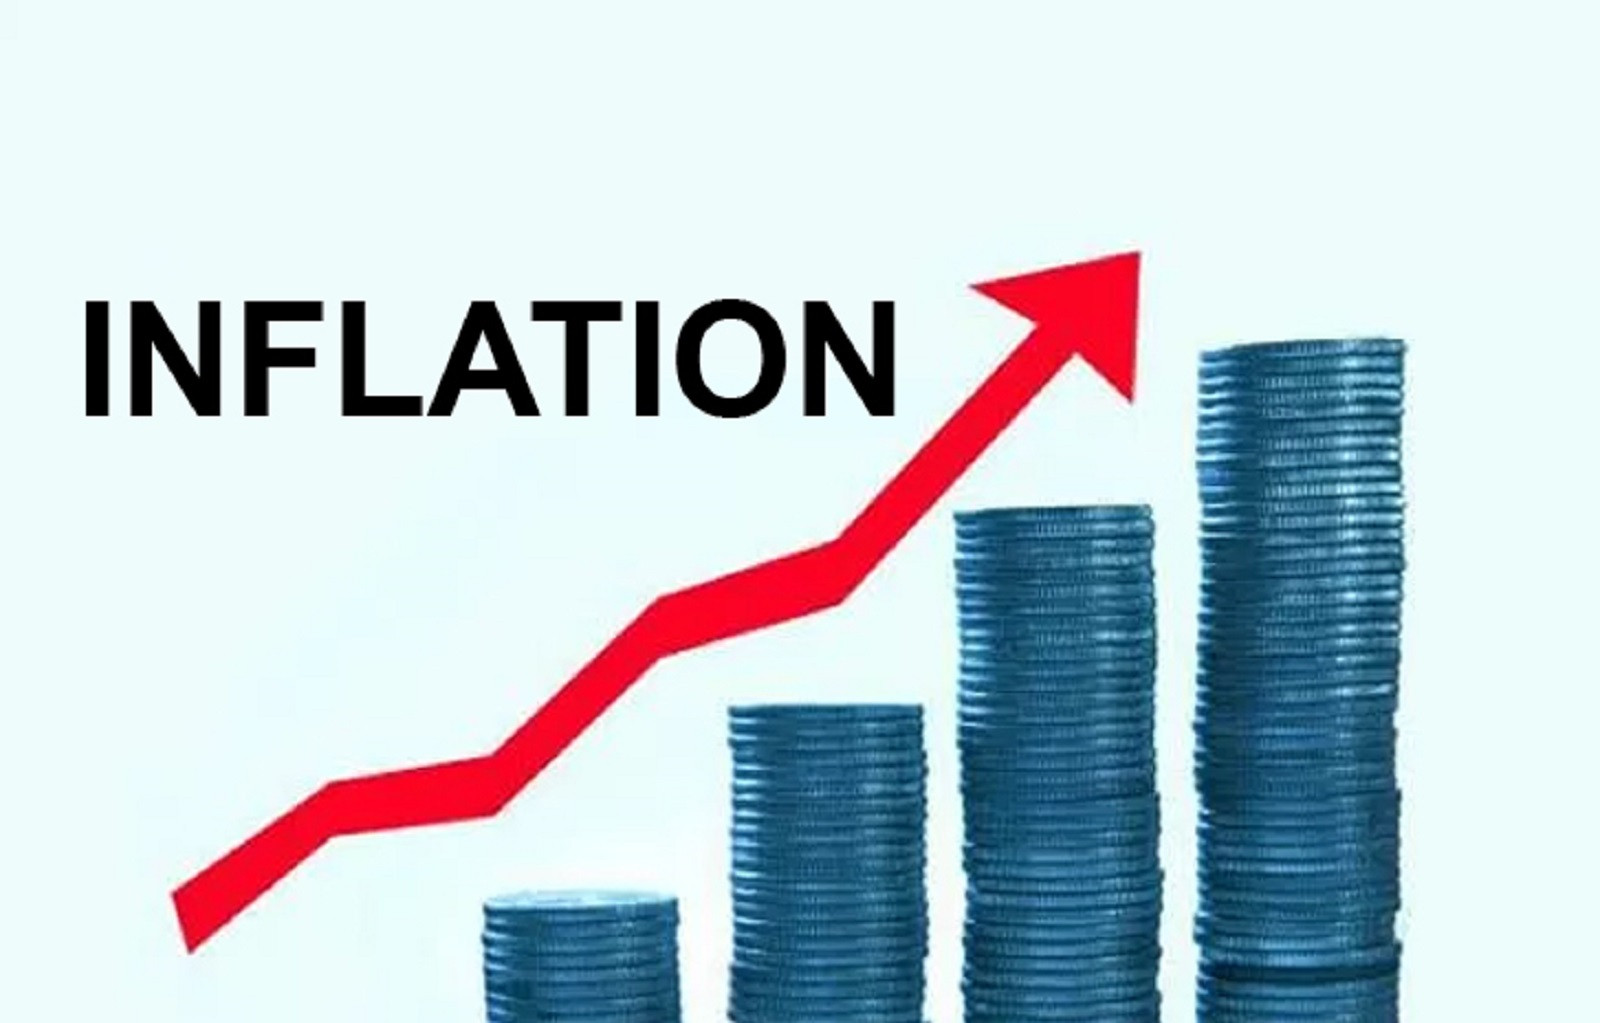 Nigeria’s Inflation Hits 14.23 Percent As Food Prices Increases